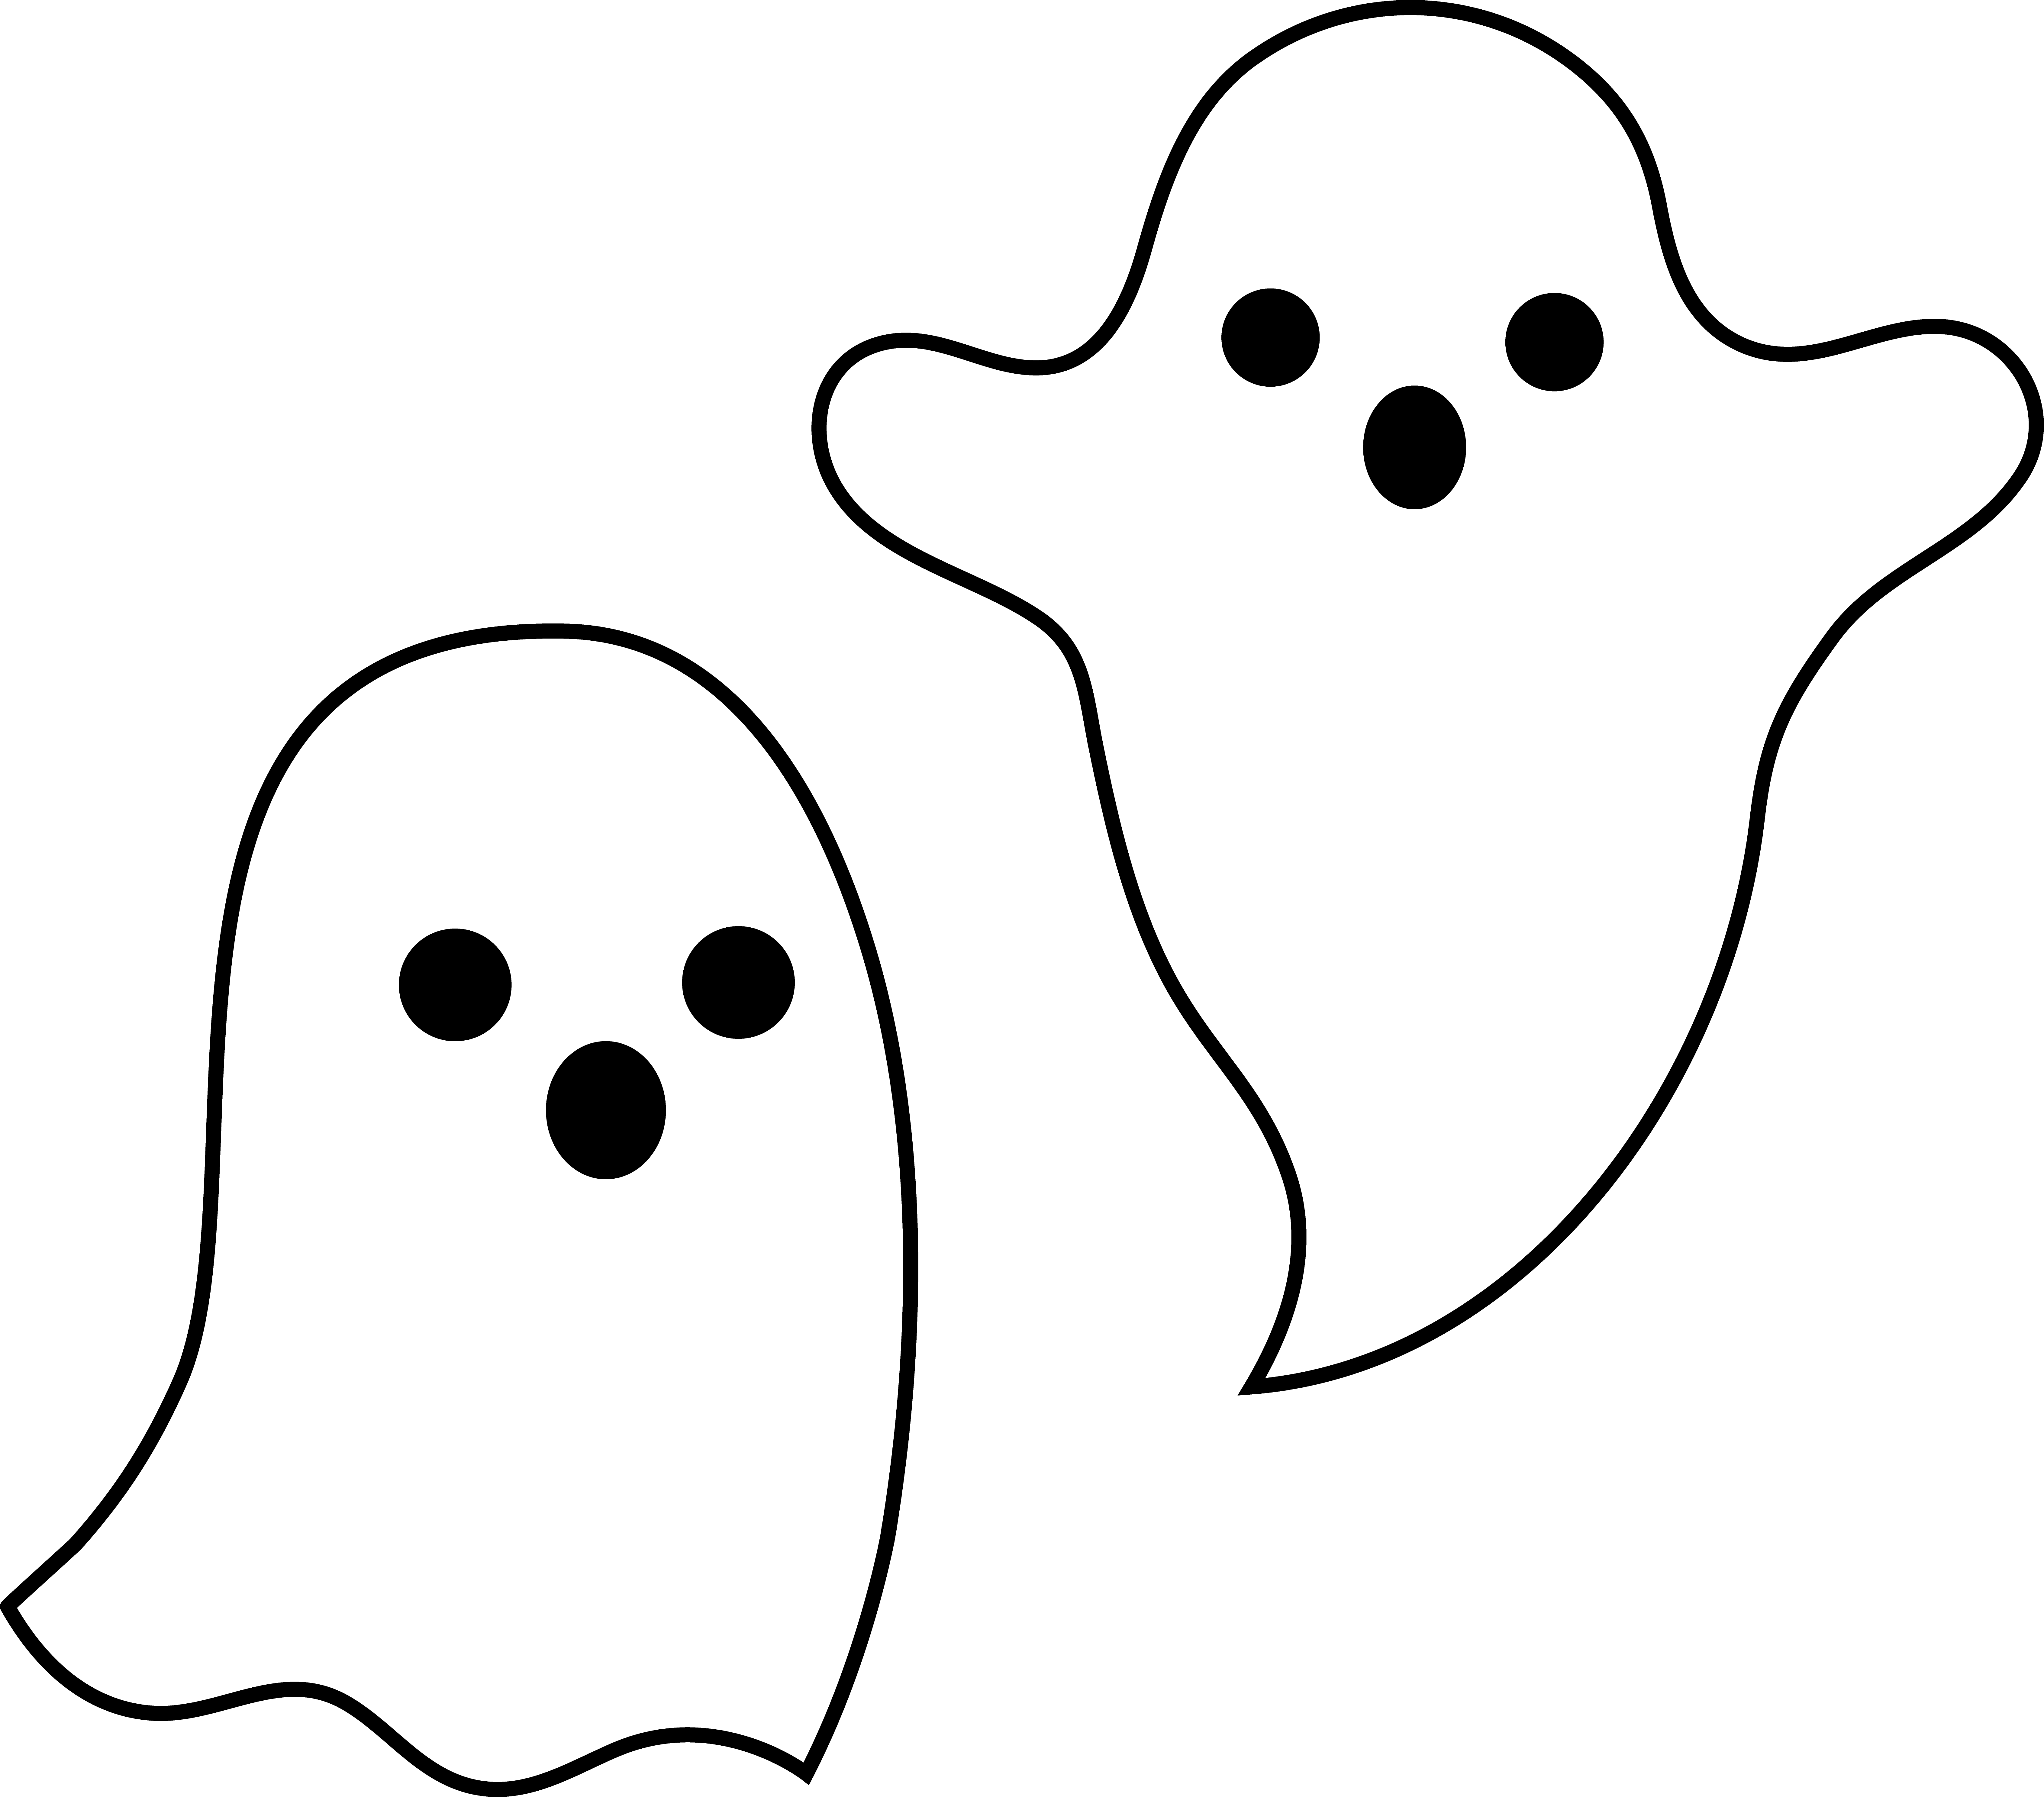 Download PNG image - Halloween Drawings PNG Pic 